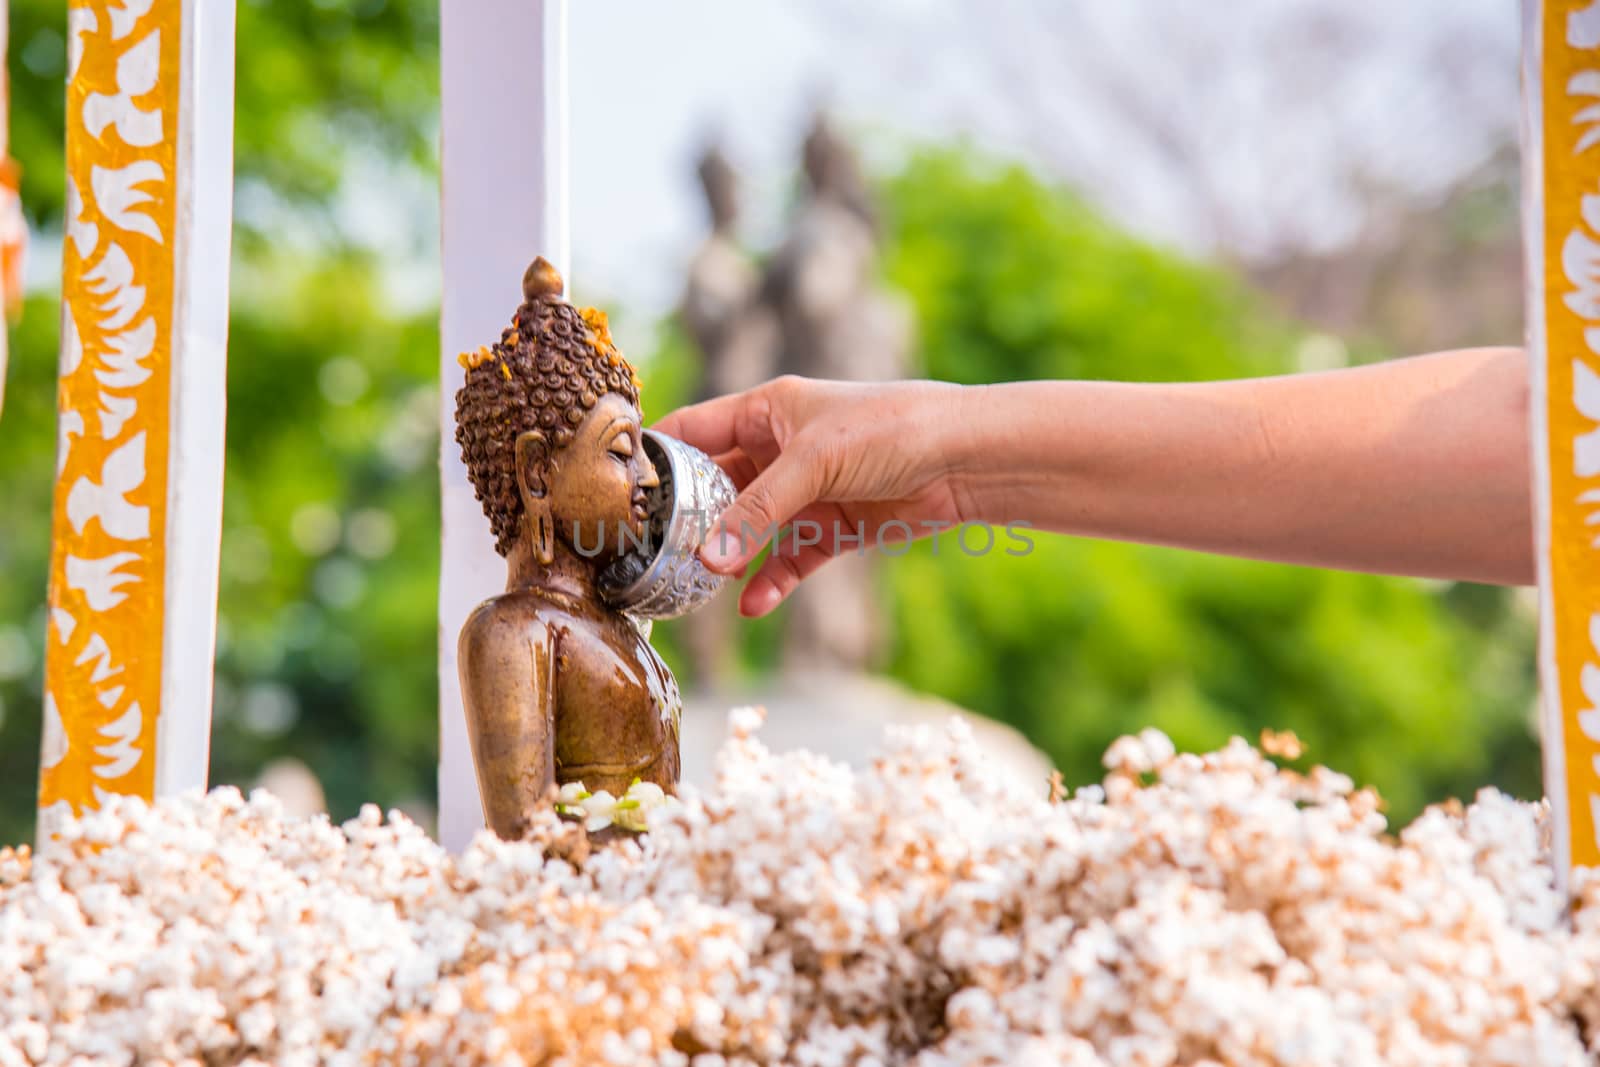 People pour water over Buddha statues during the Songkran Days or traditional Thai New Year.